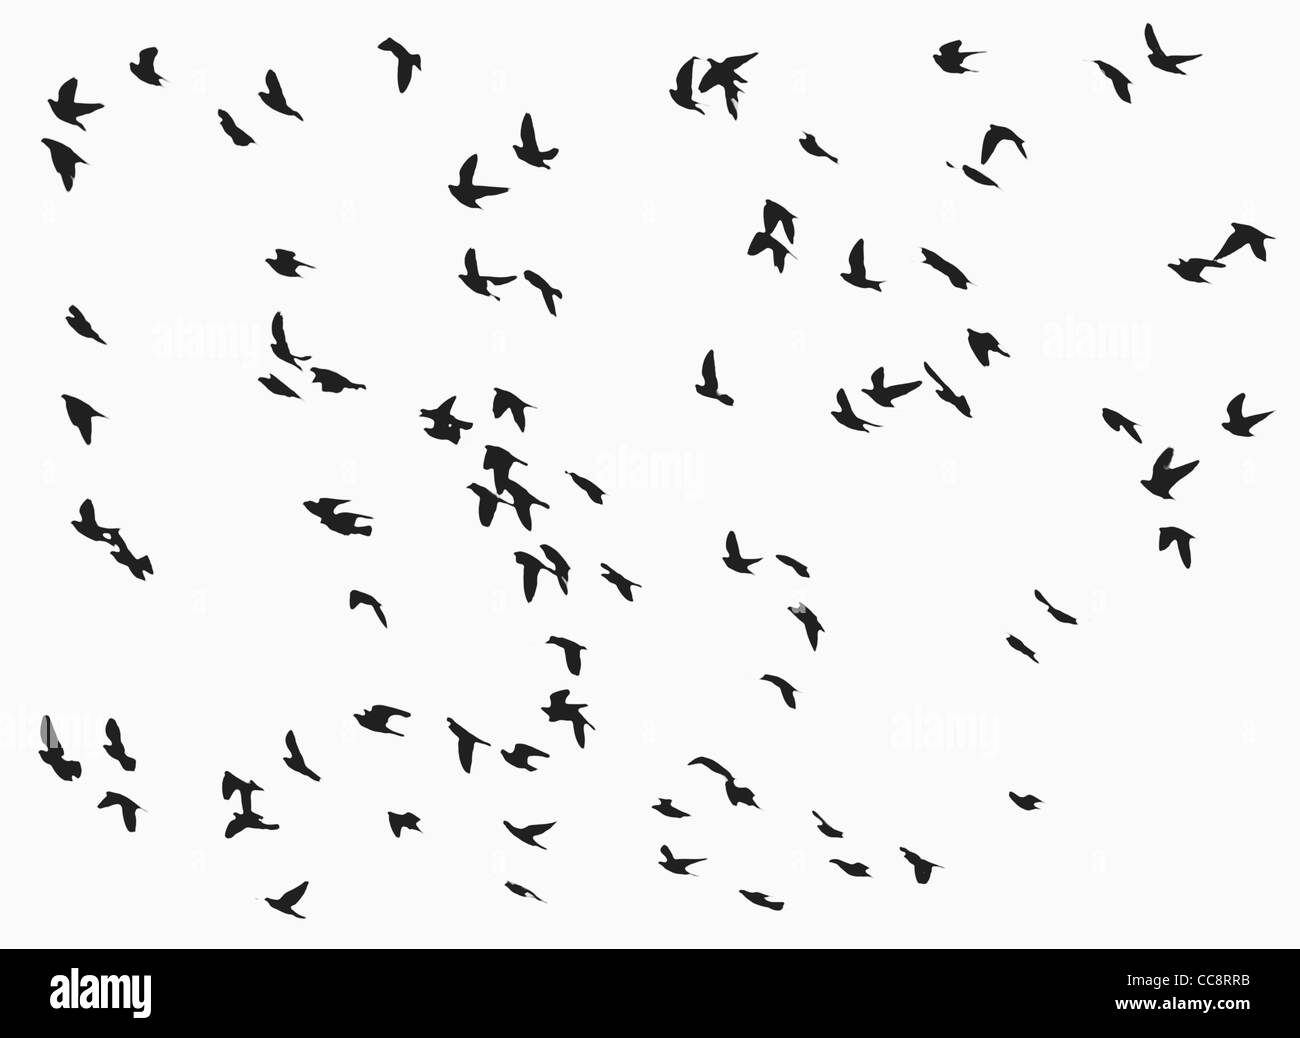 crows in flight Stock Photo